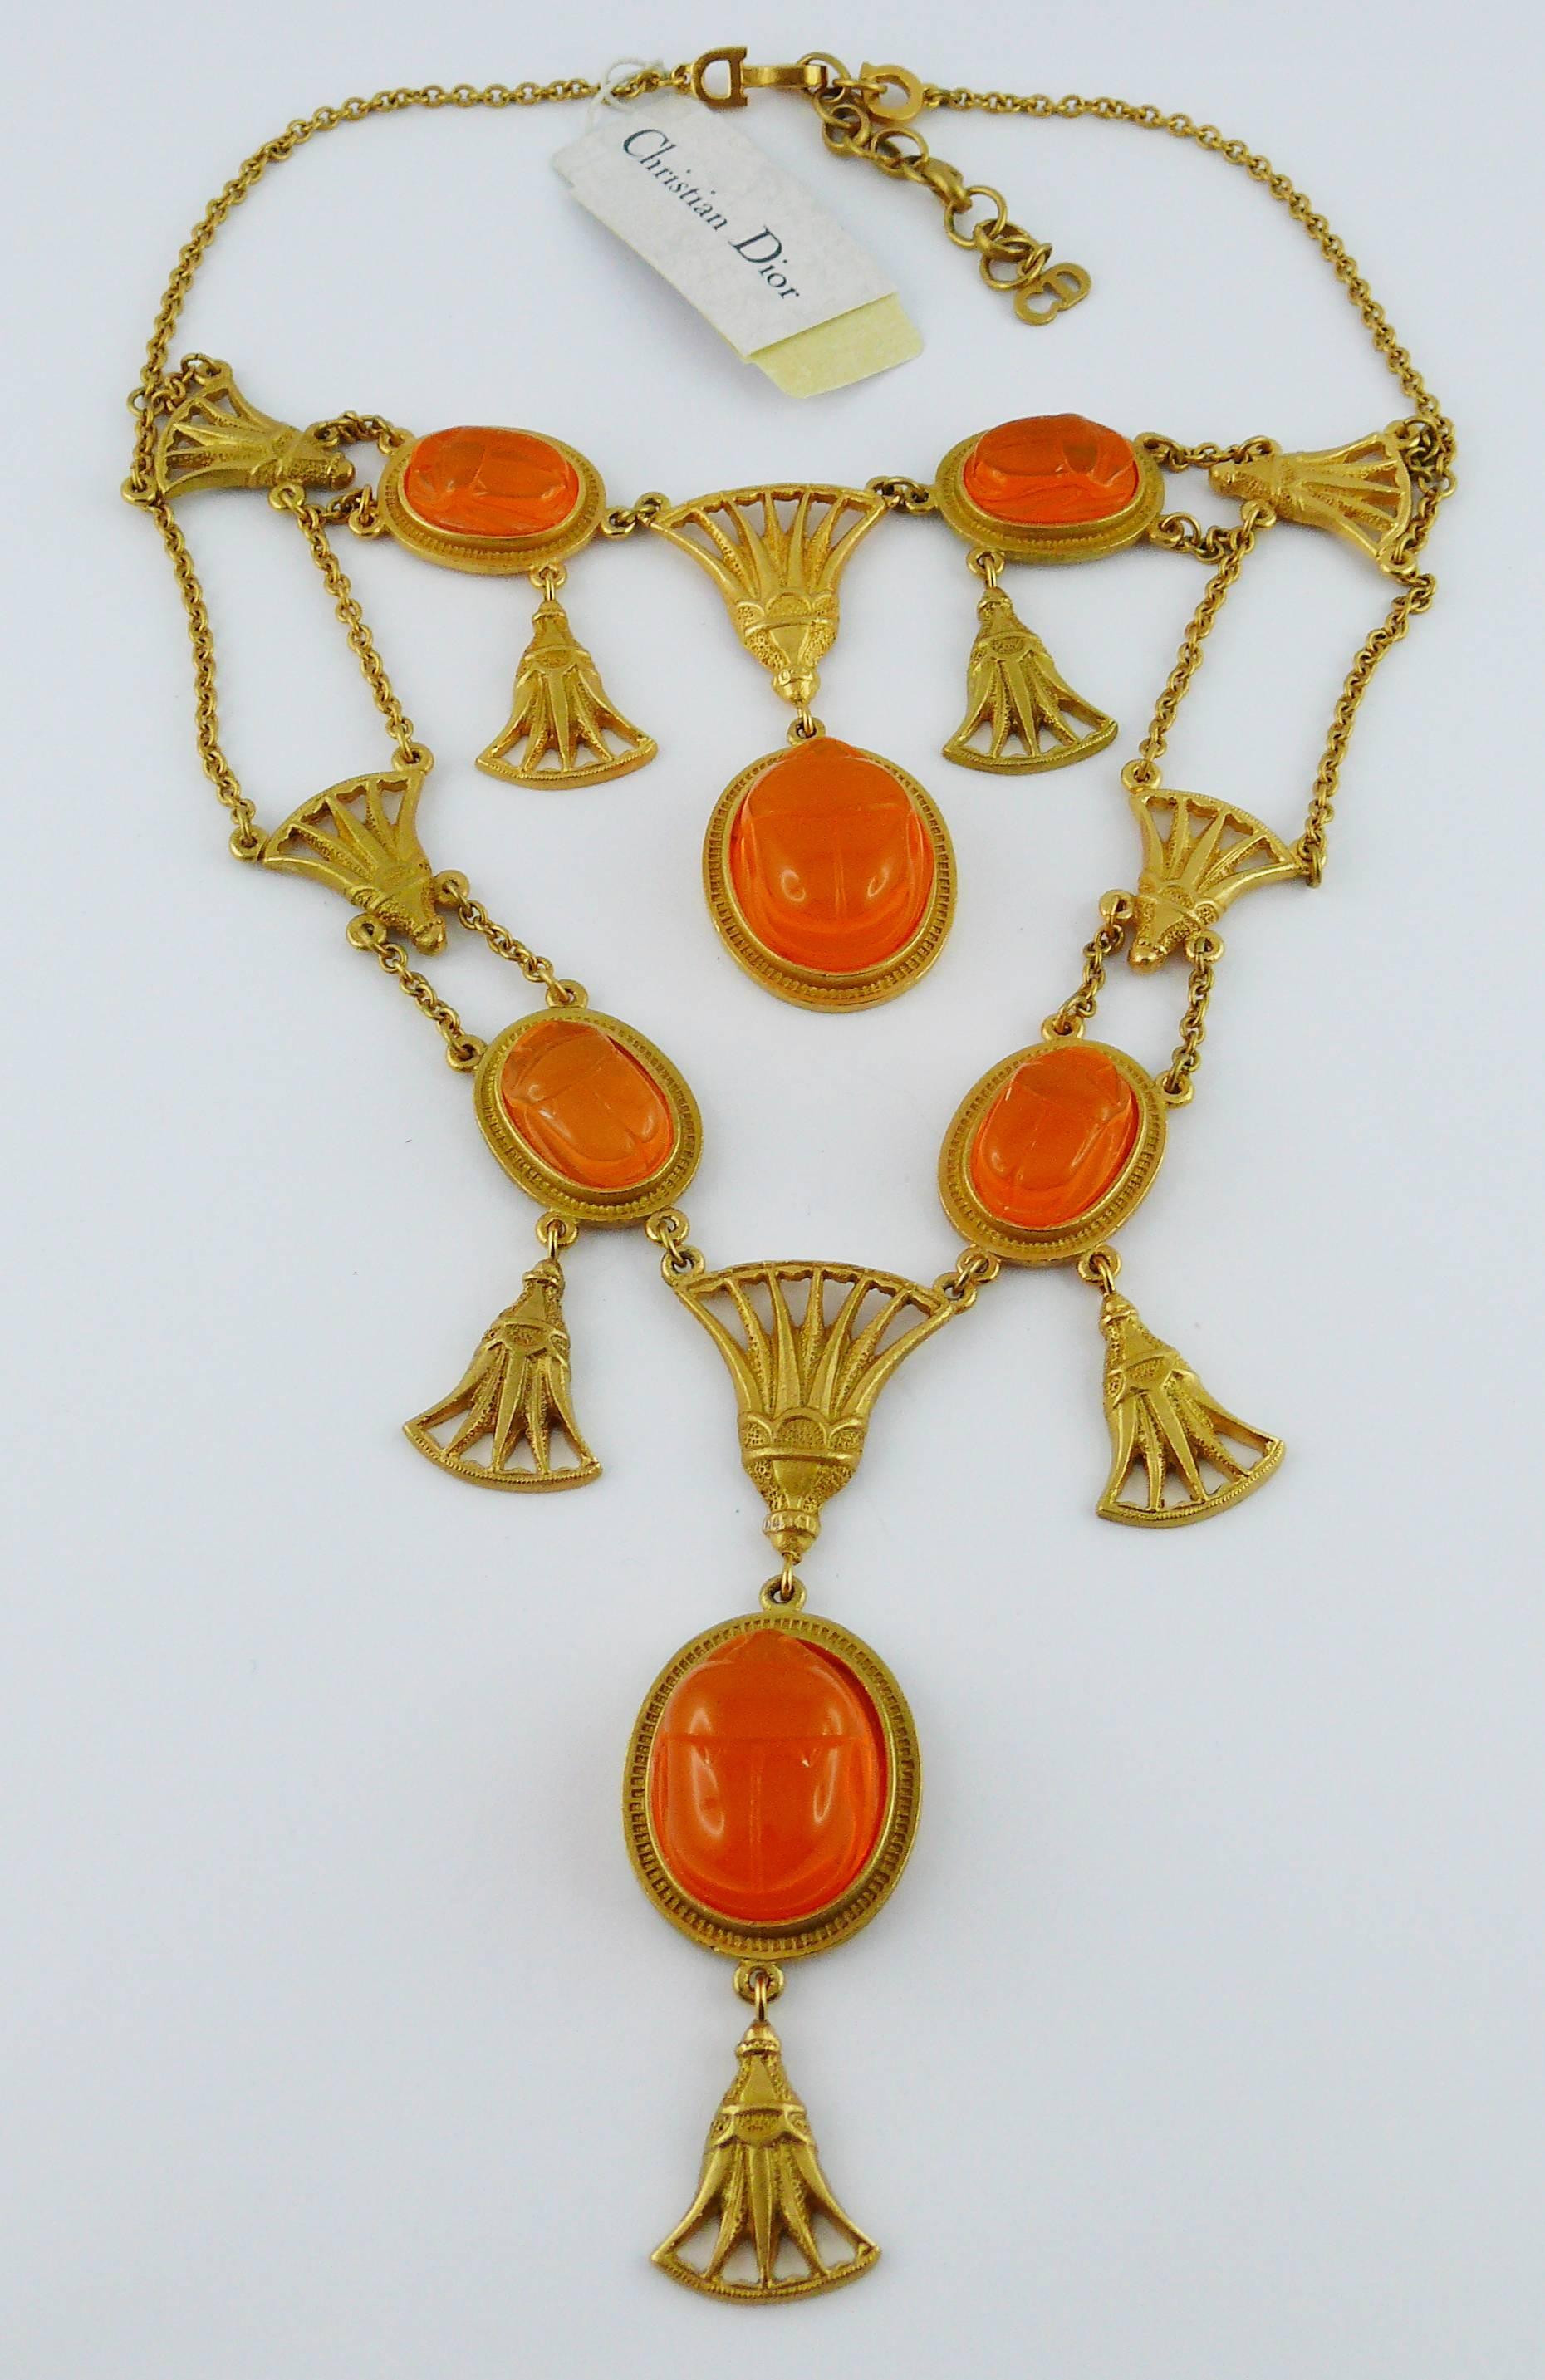 CHRSITIAN DIOR by JOHN GALLIANO Egyptian revival necklace featuring antique ornaments and six lucite scarabs in a matte gold tone setting.

The scarabs are an irridescent orange/gold which changes in different light and upon movement.

Spring/Summer